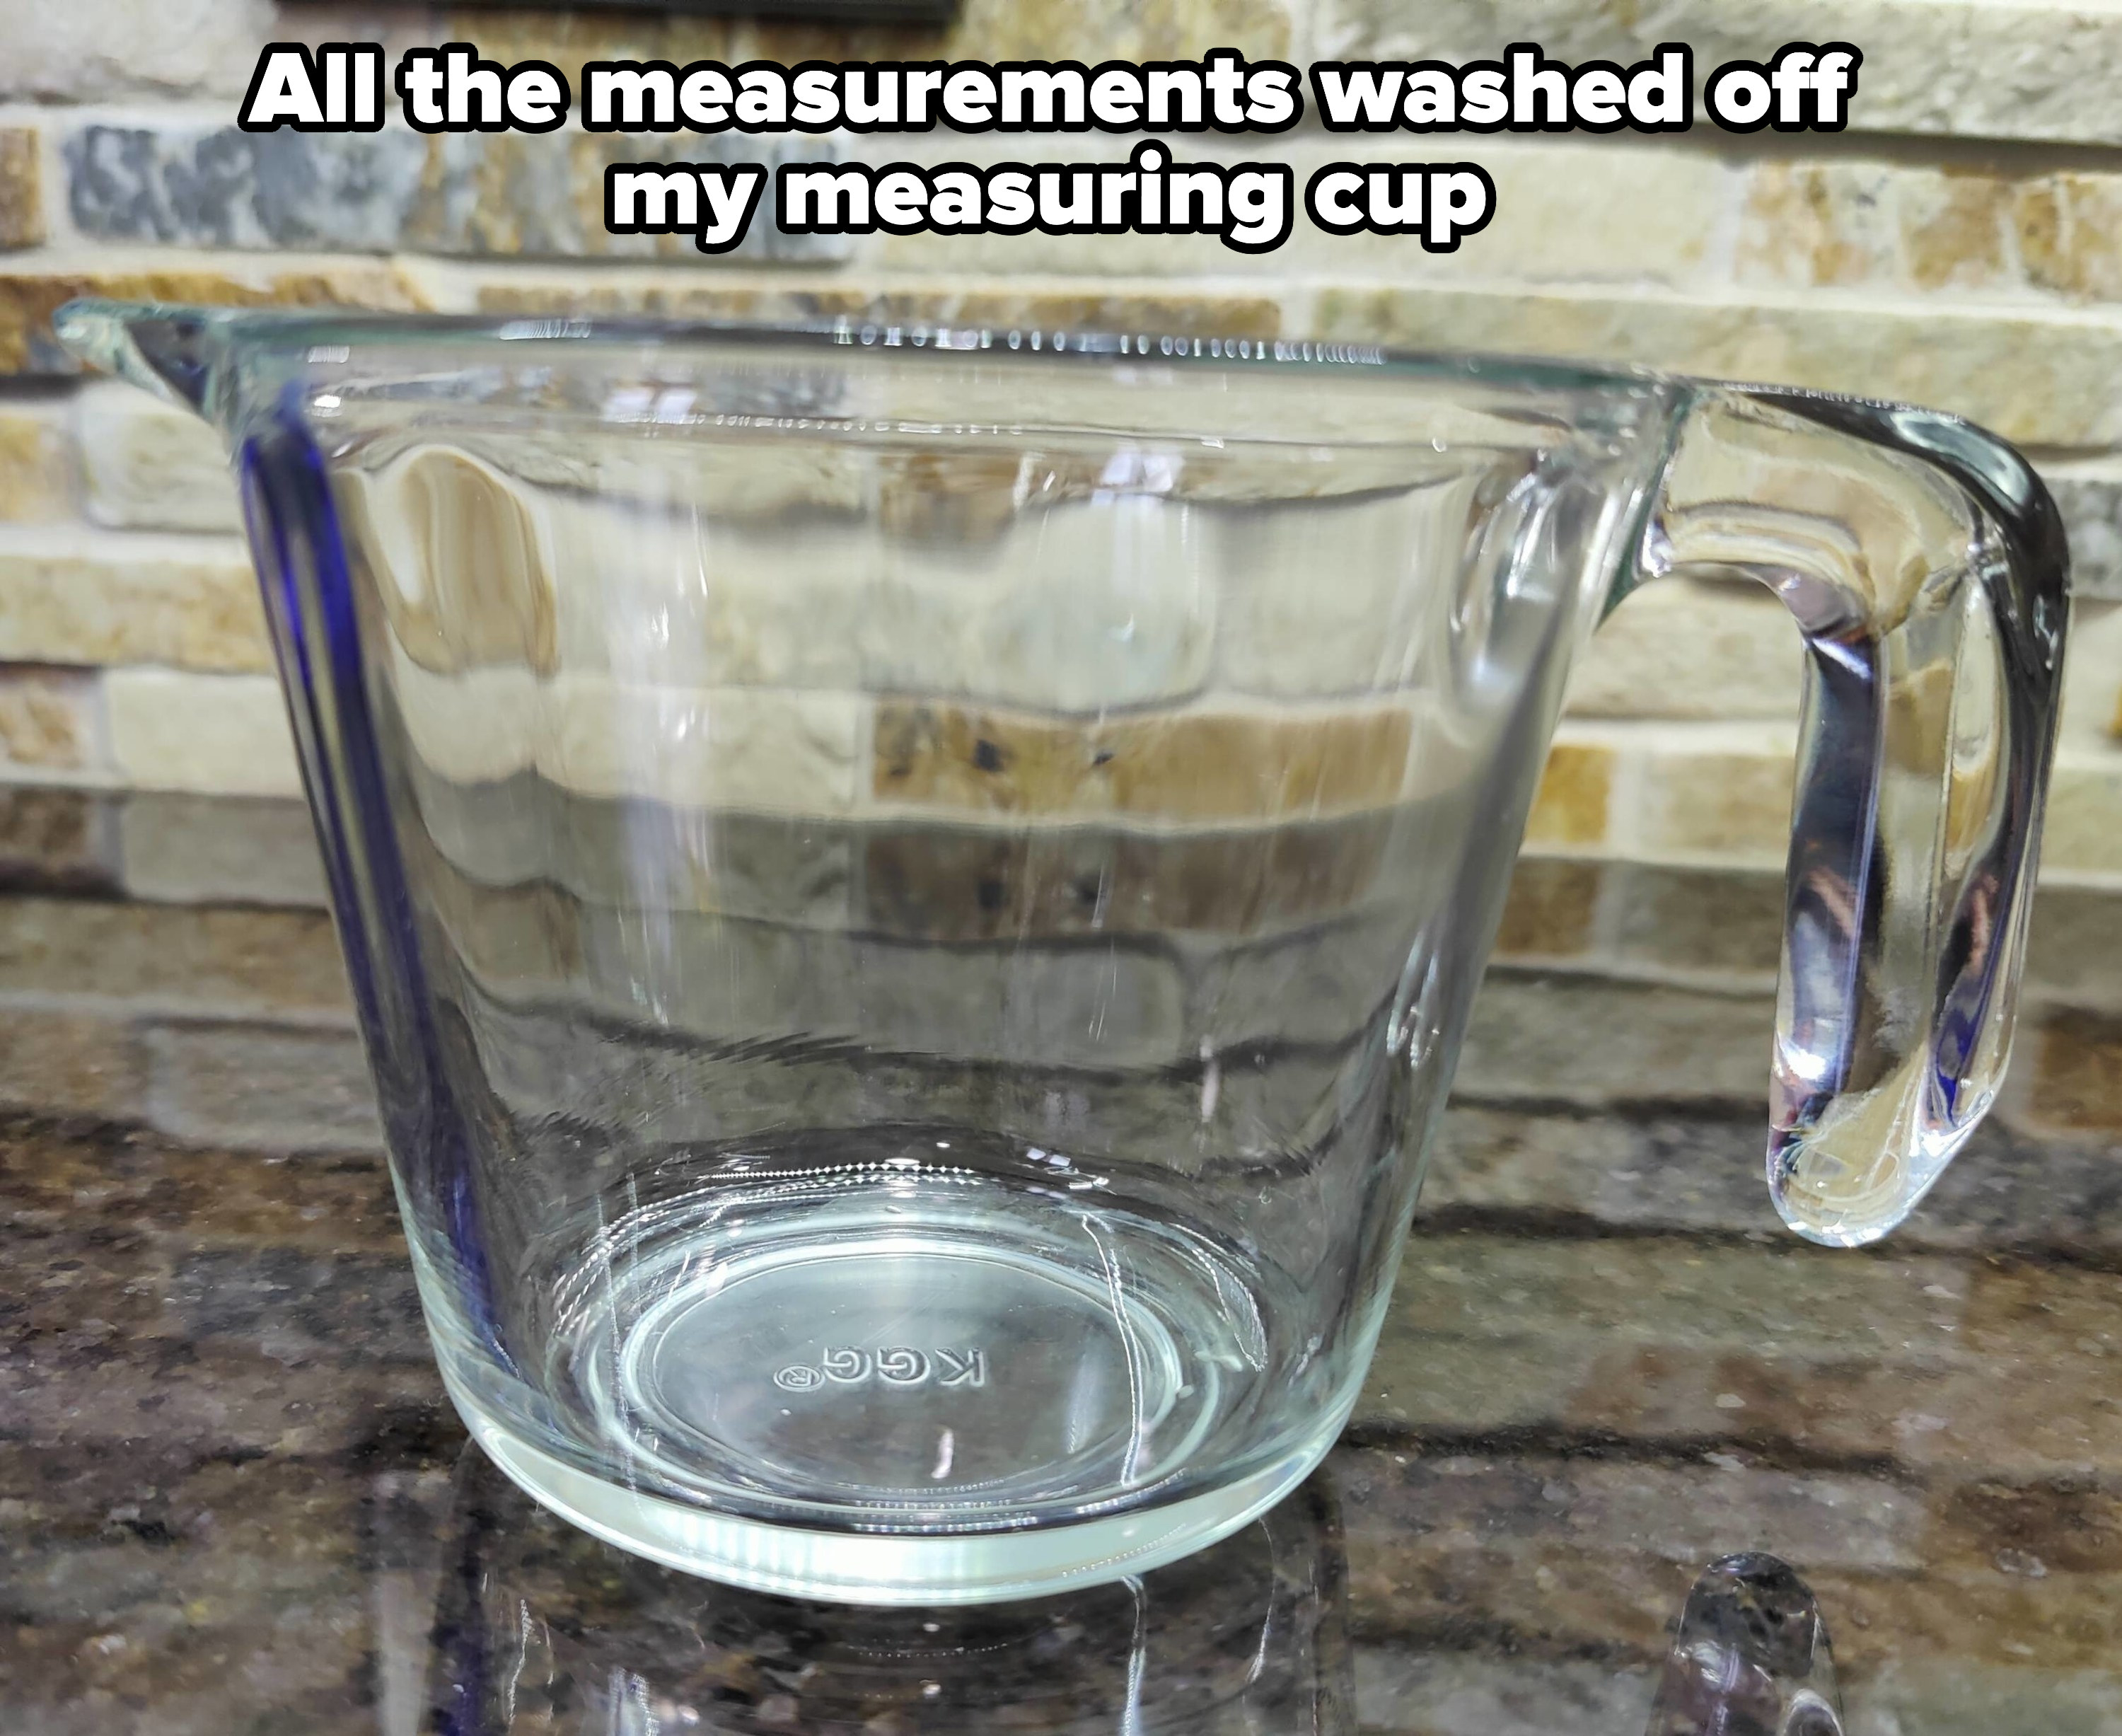 A measuring cup without any form of measurement